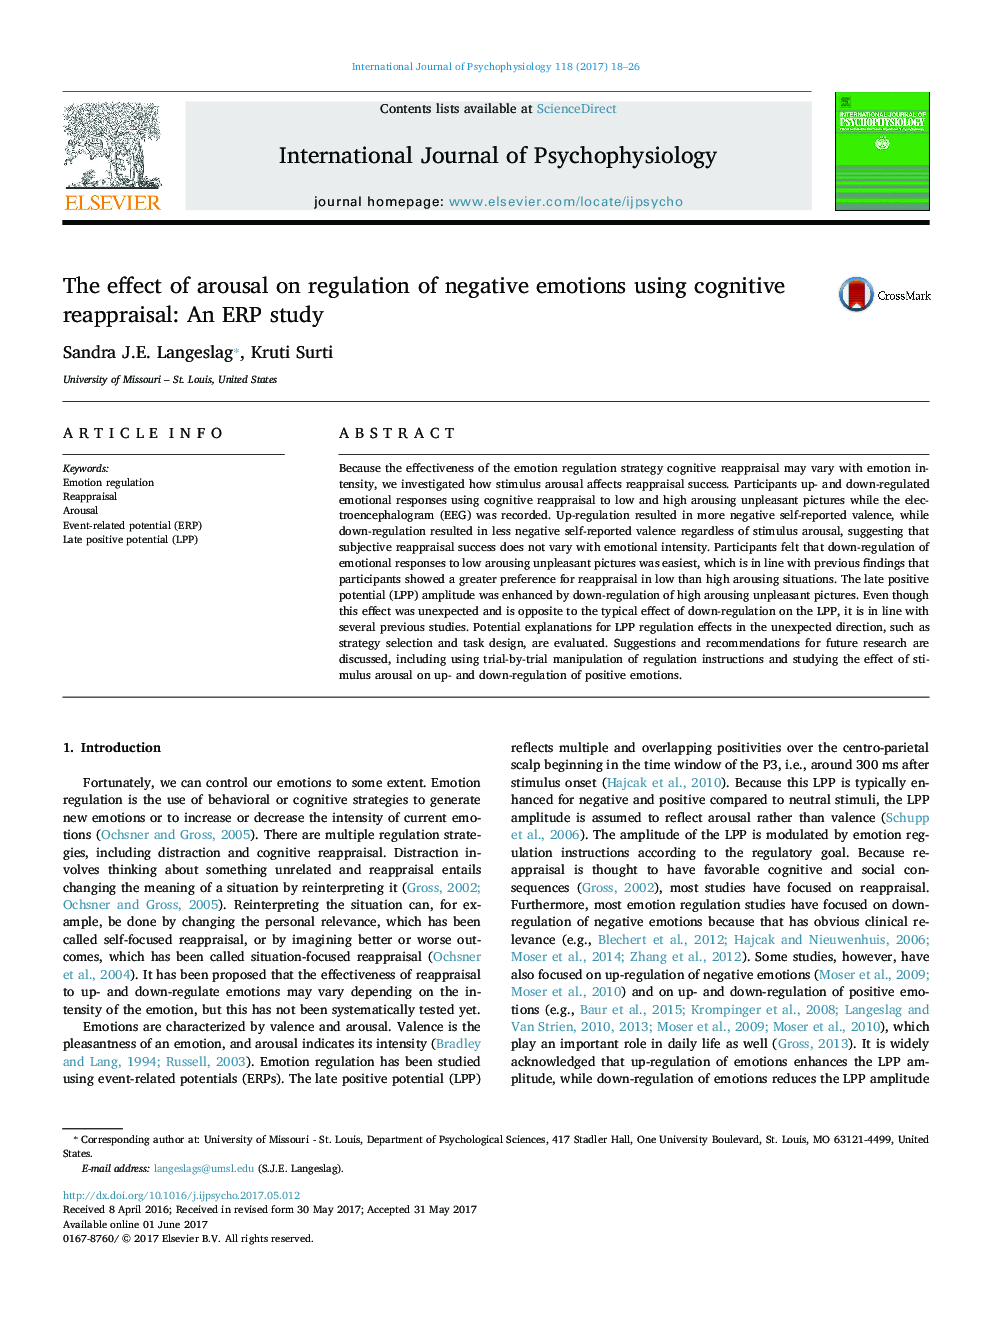 The effect of arousal on regulation of negative emotions using cognitive reappraisal: An ERP study